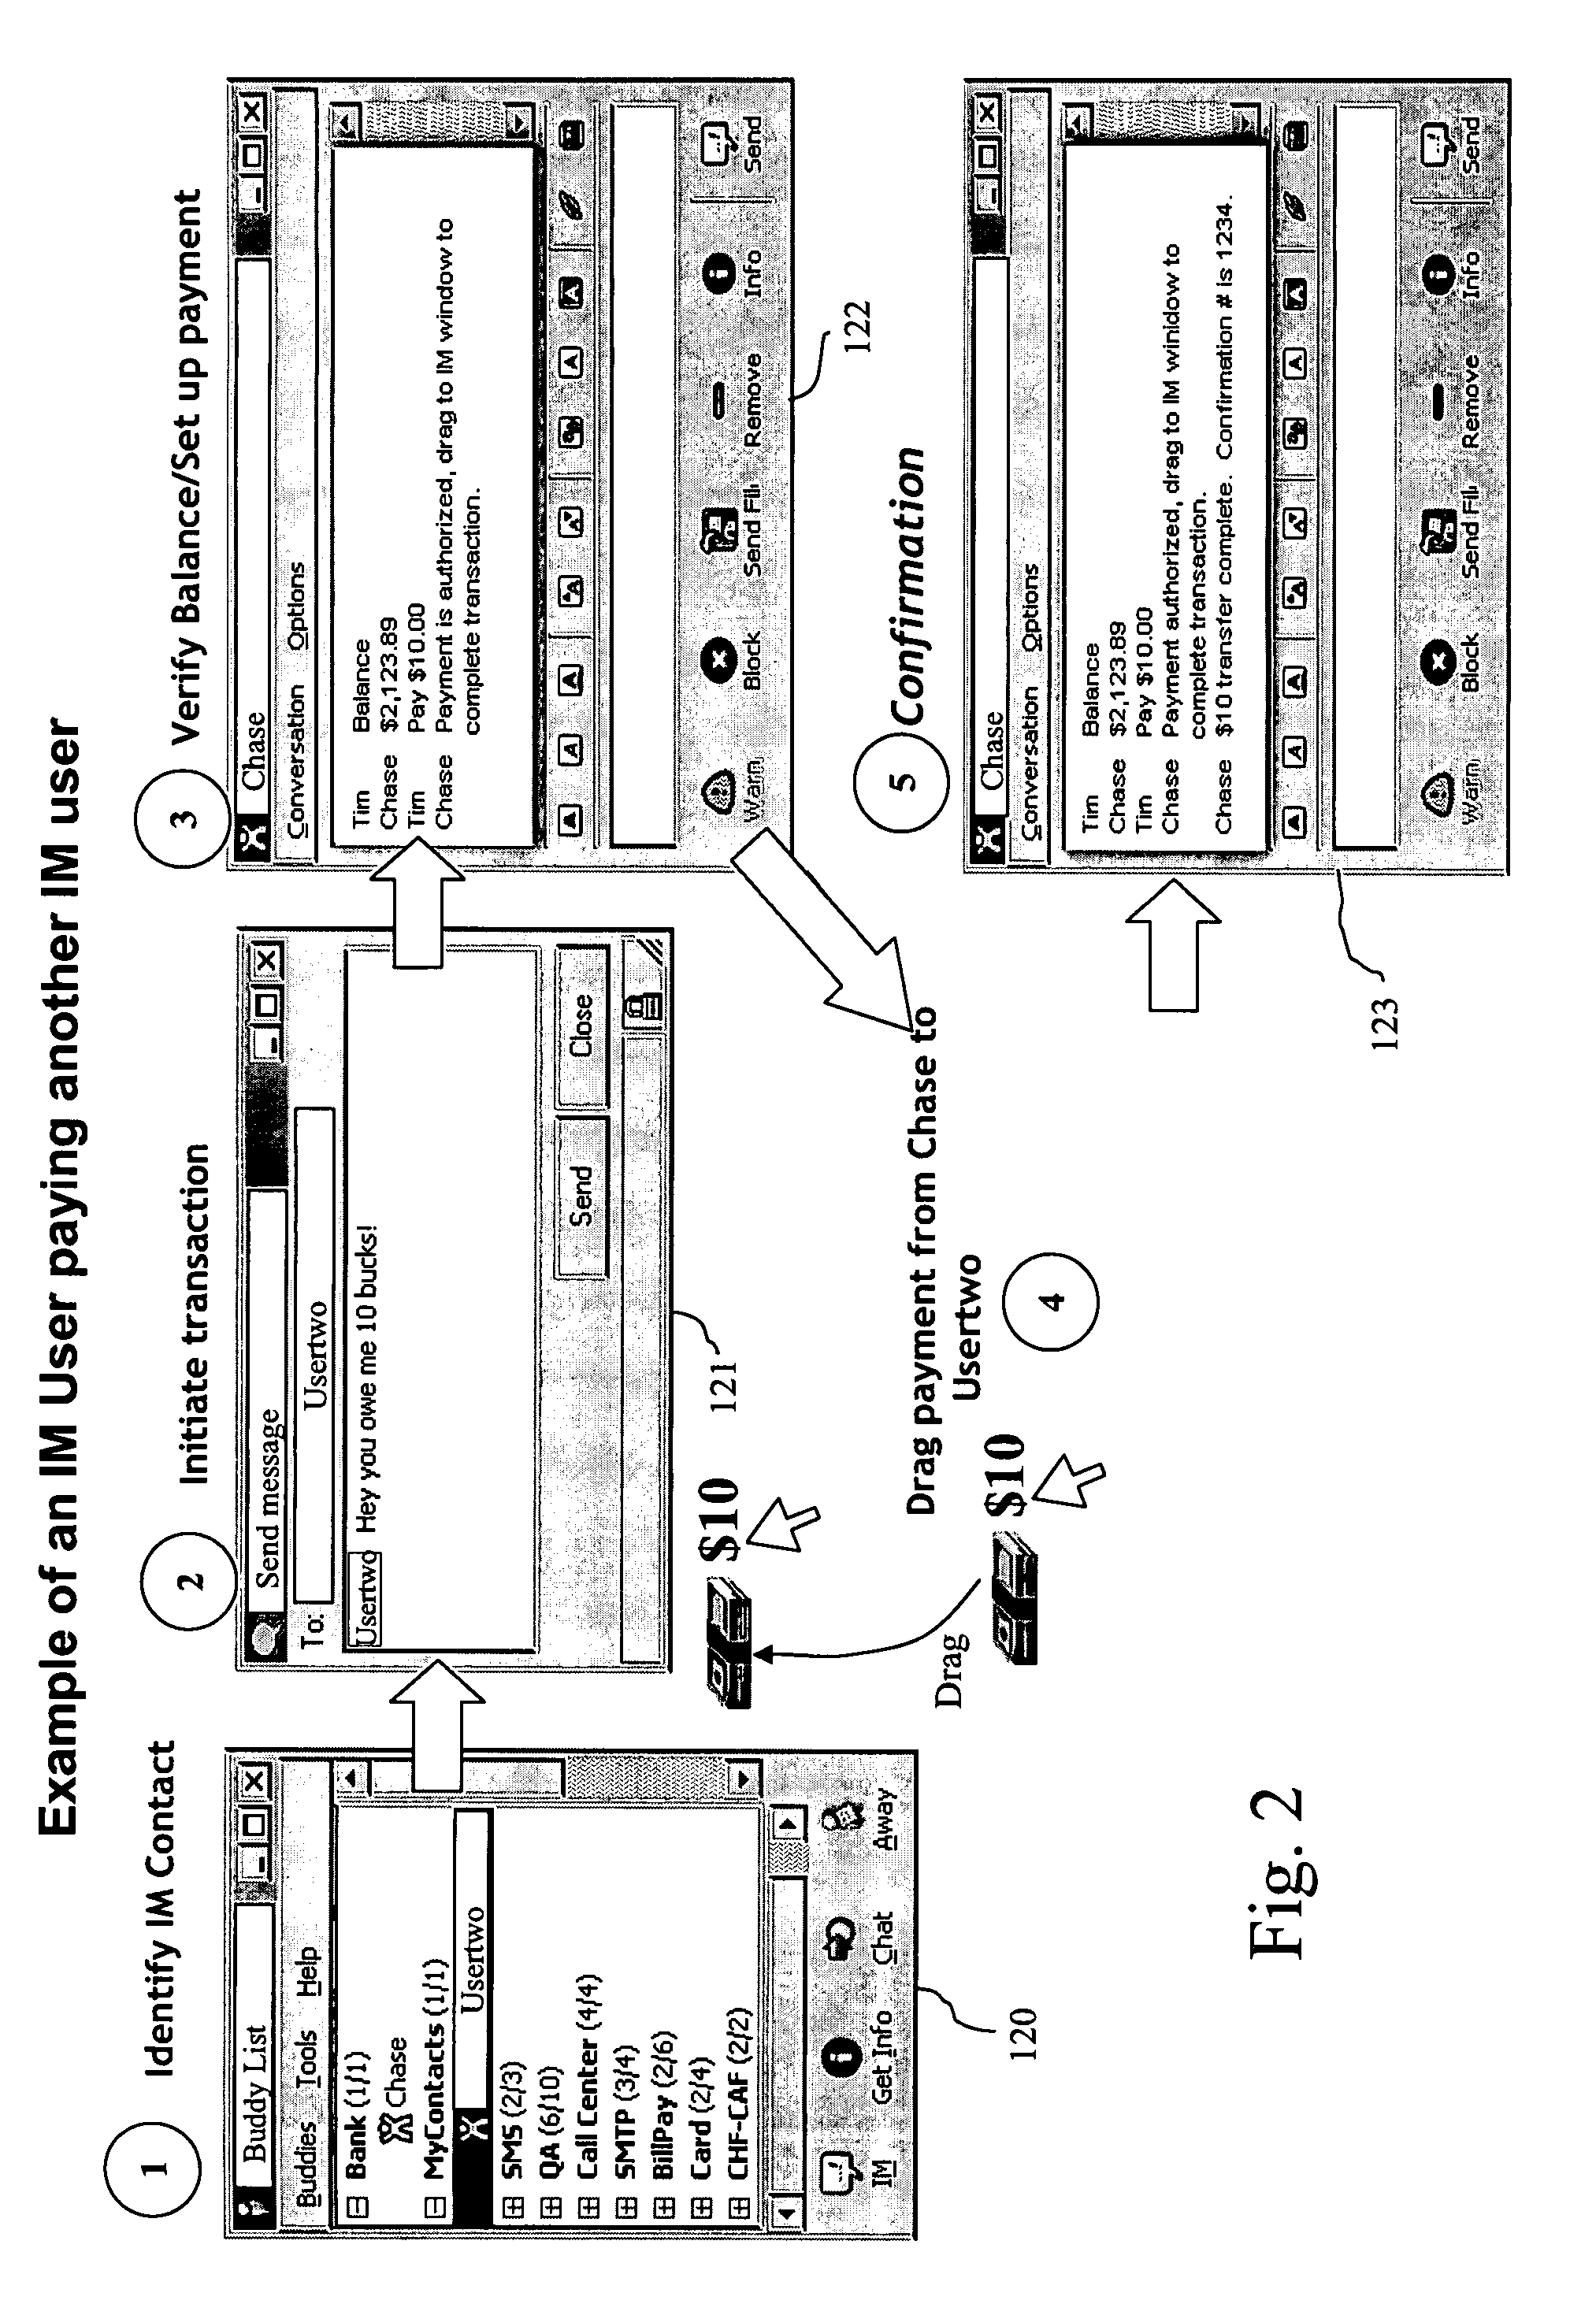 Systems and methods for providing financial processing in conjunction with instant messaging and other communications